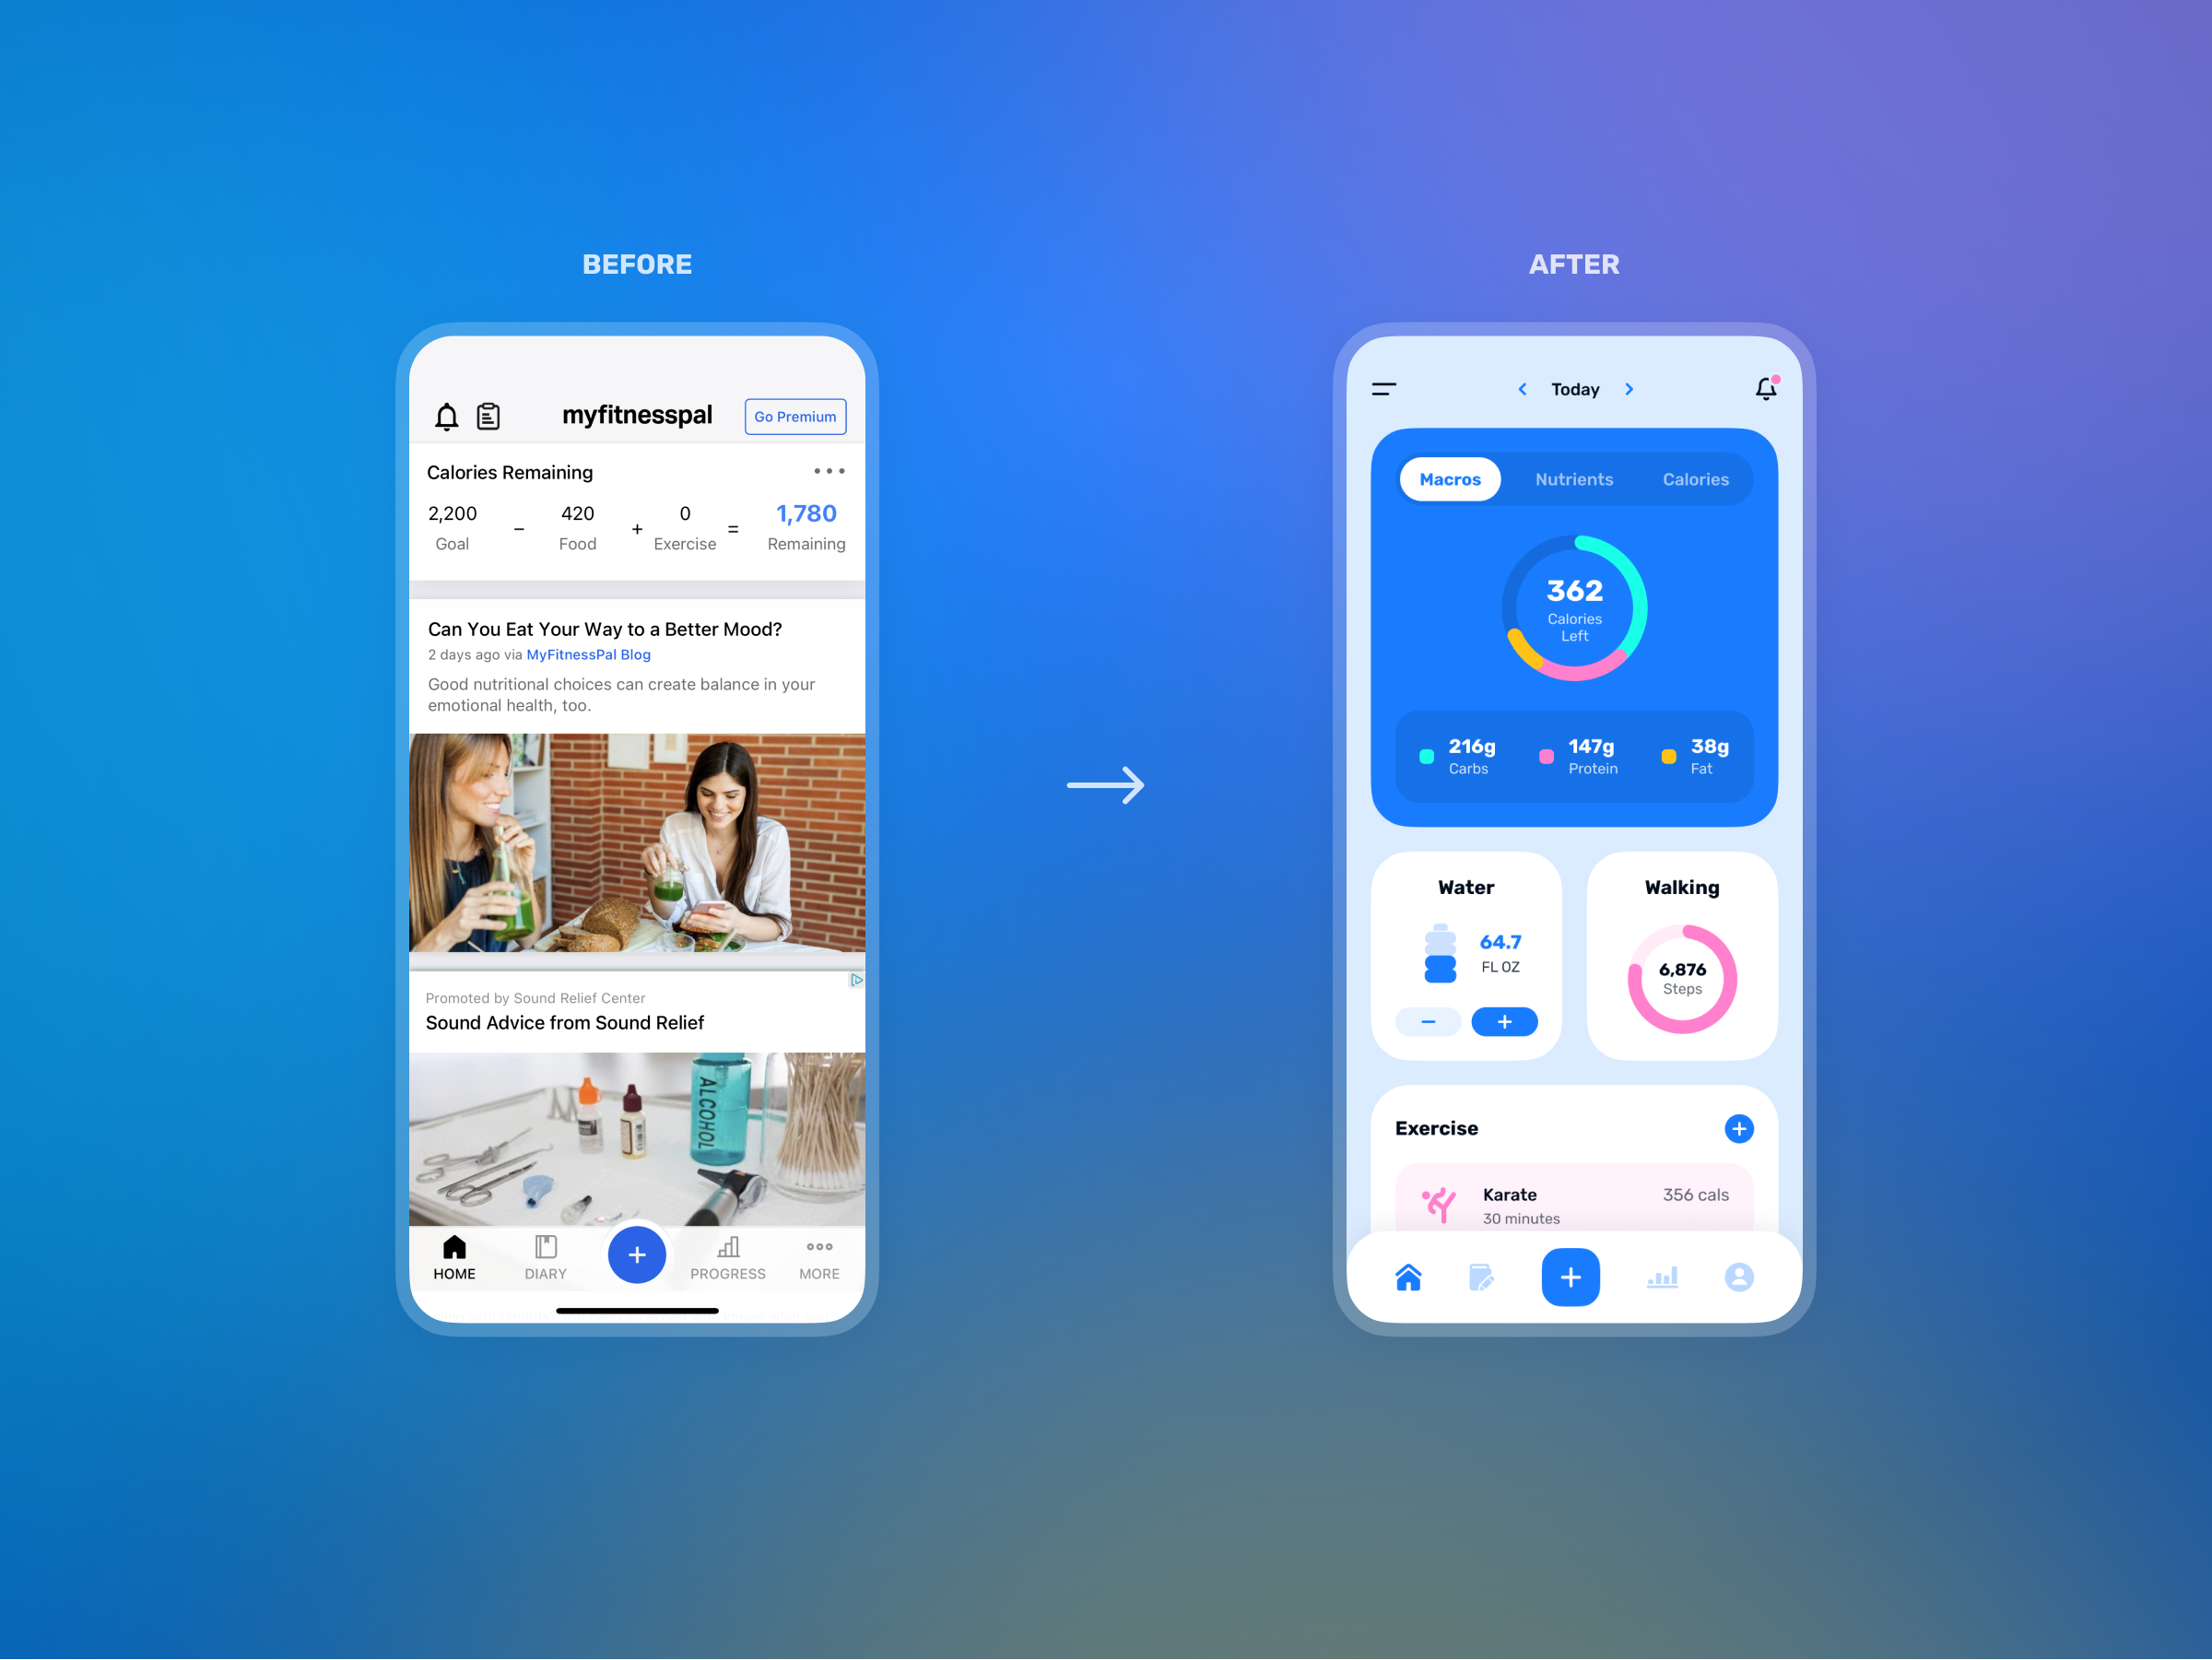 My Fitness pal Redesign